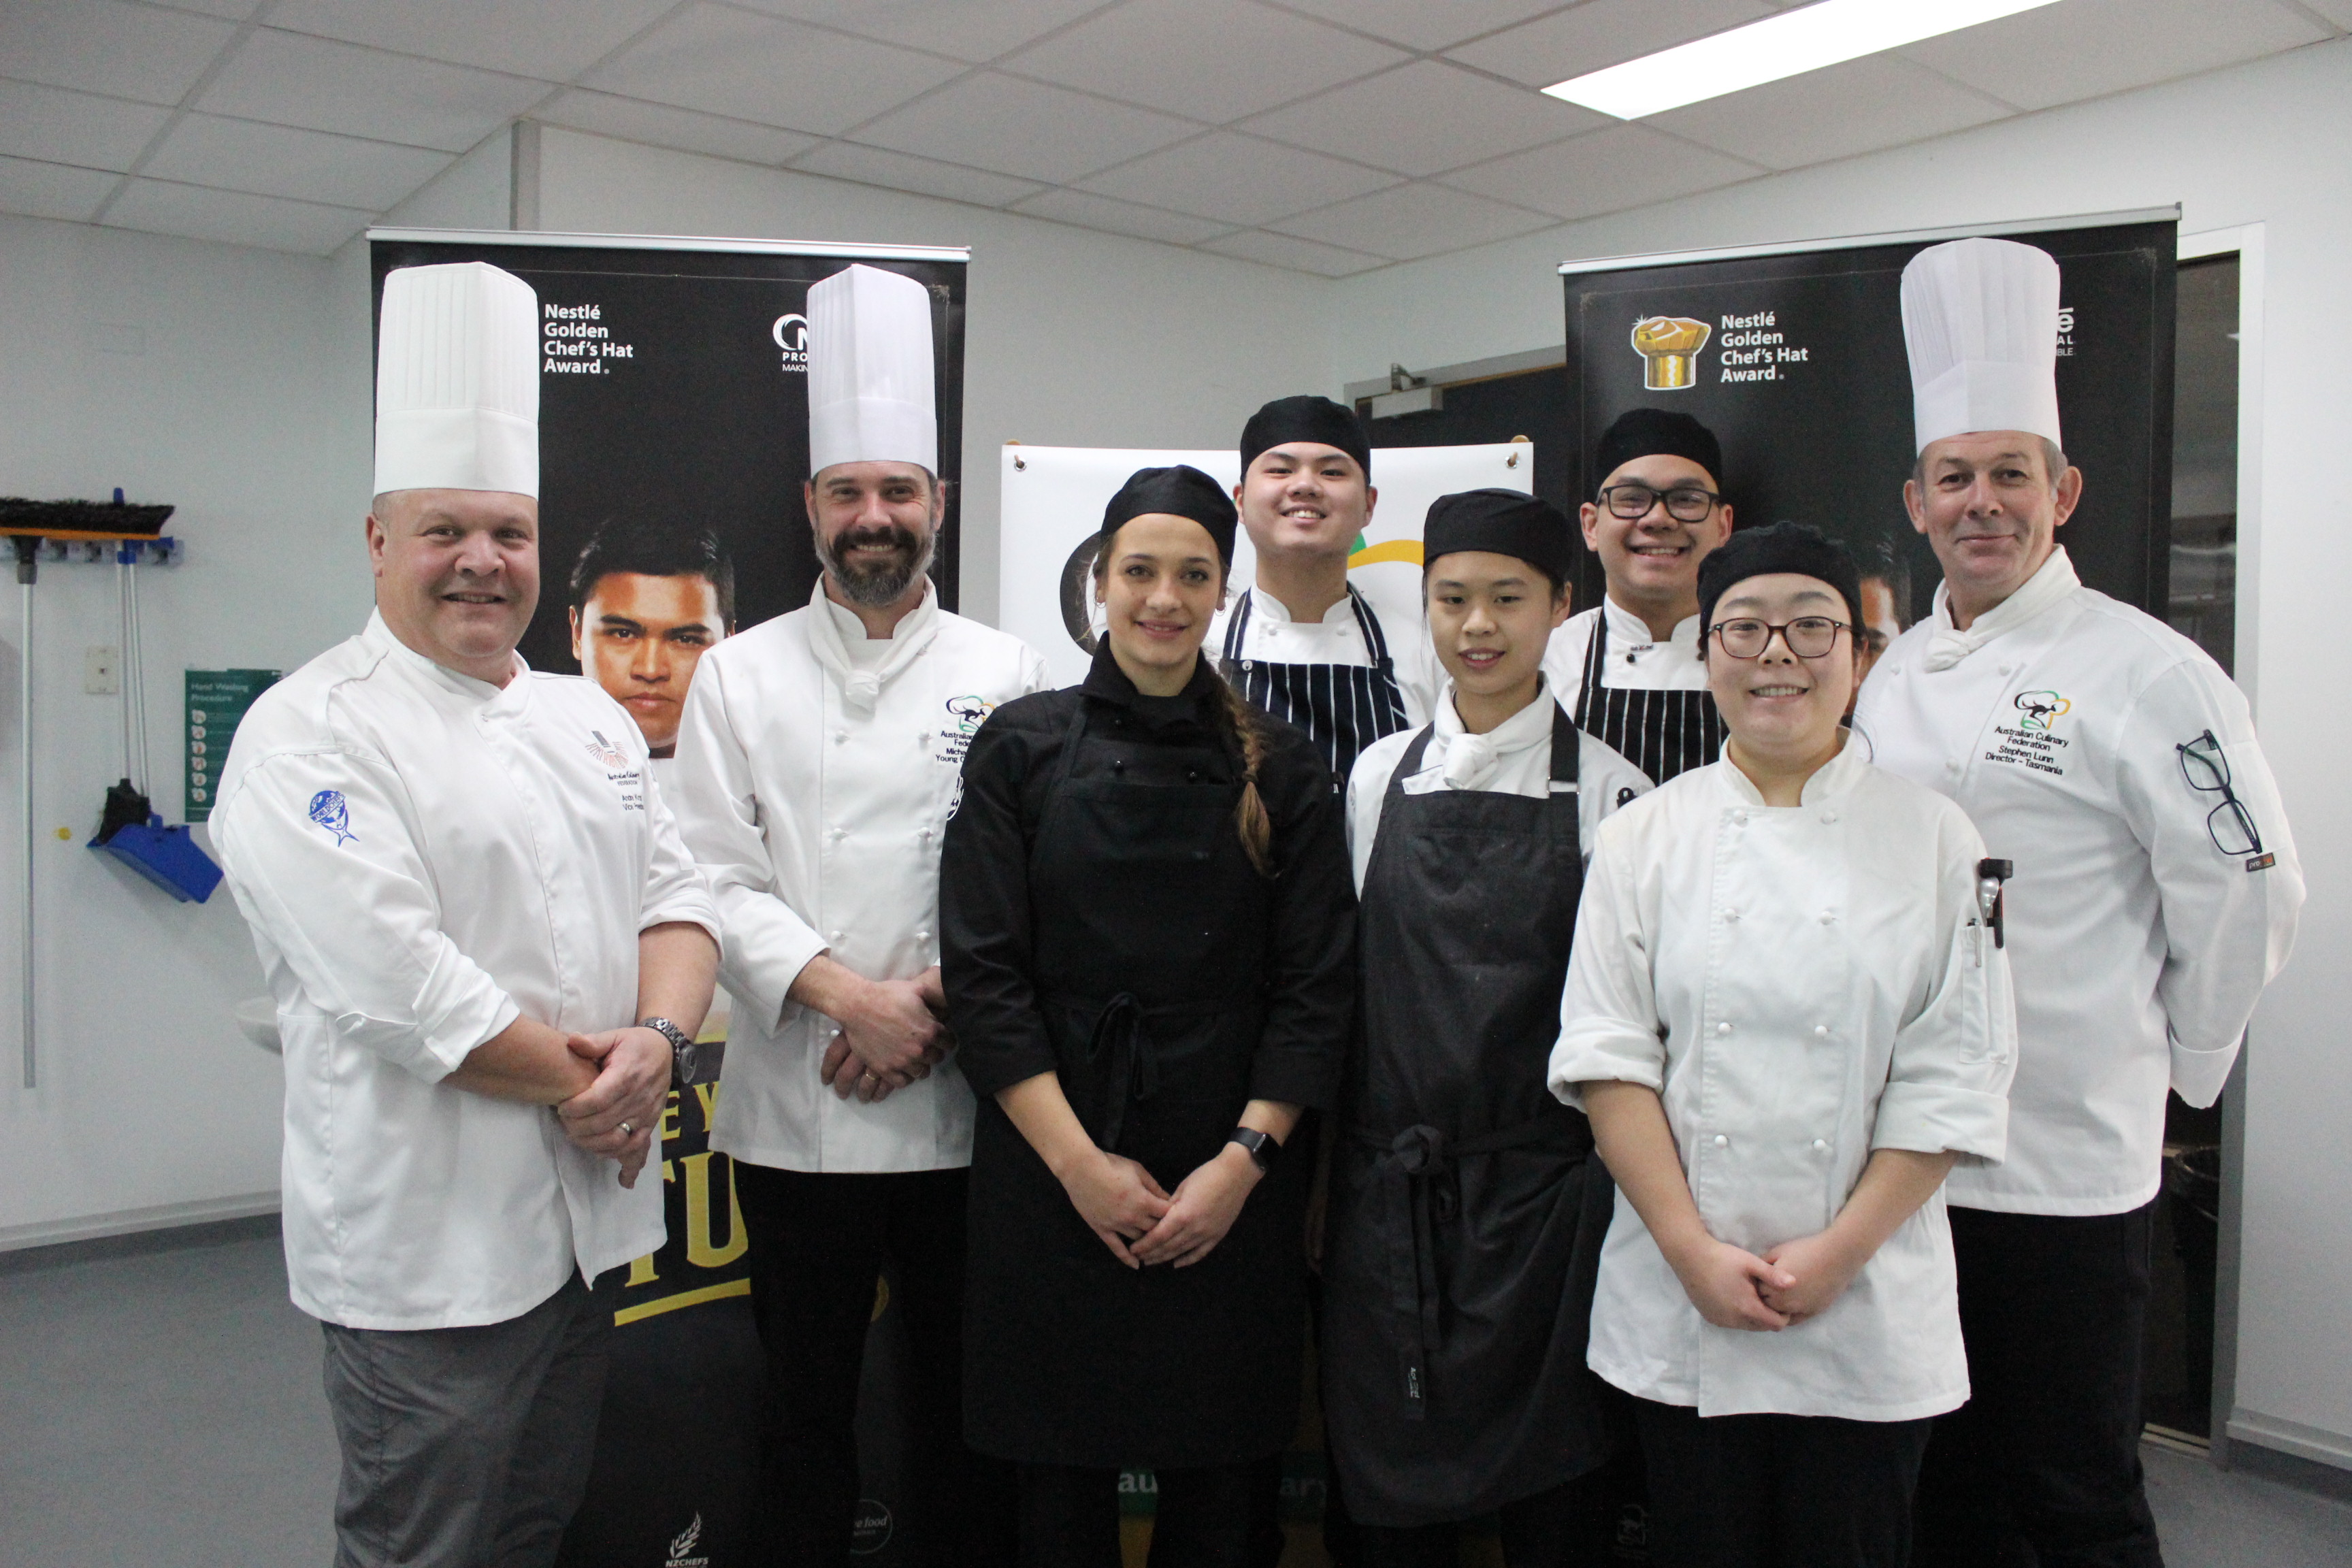 Golden Chefs Hat competitors pose with the judges